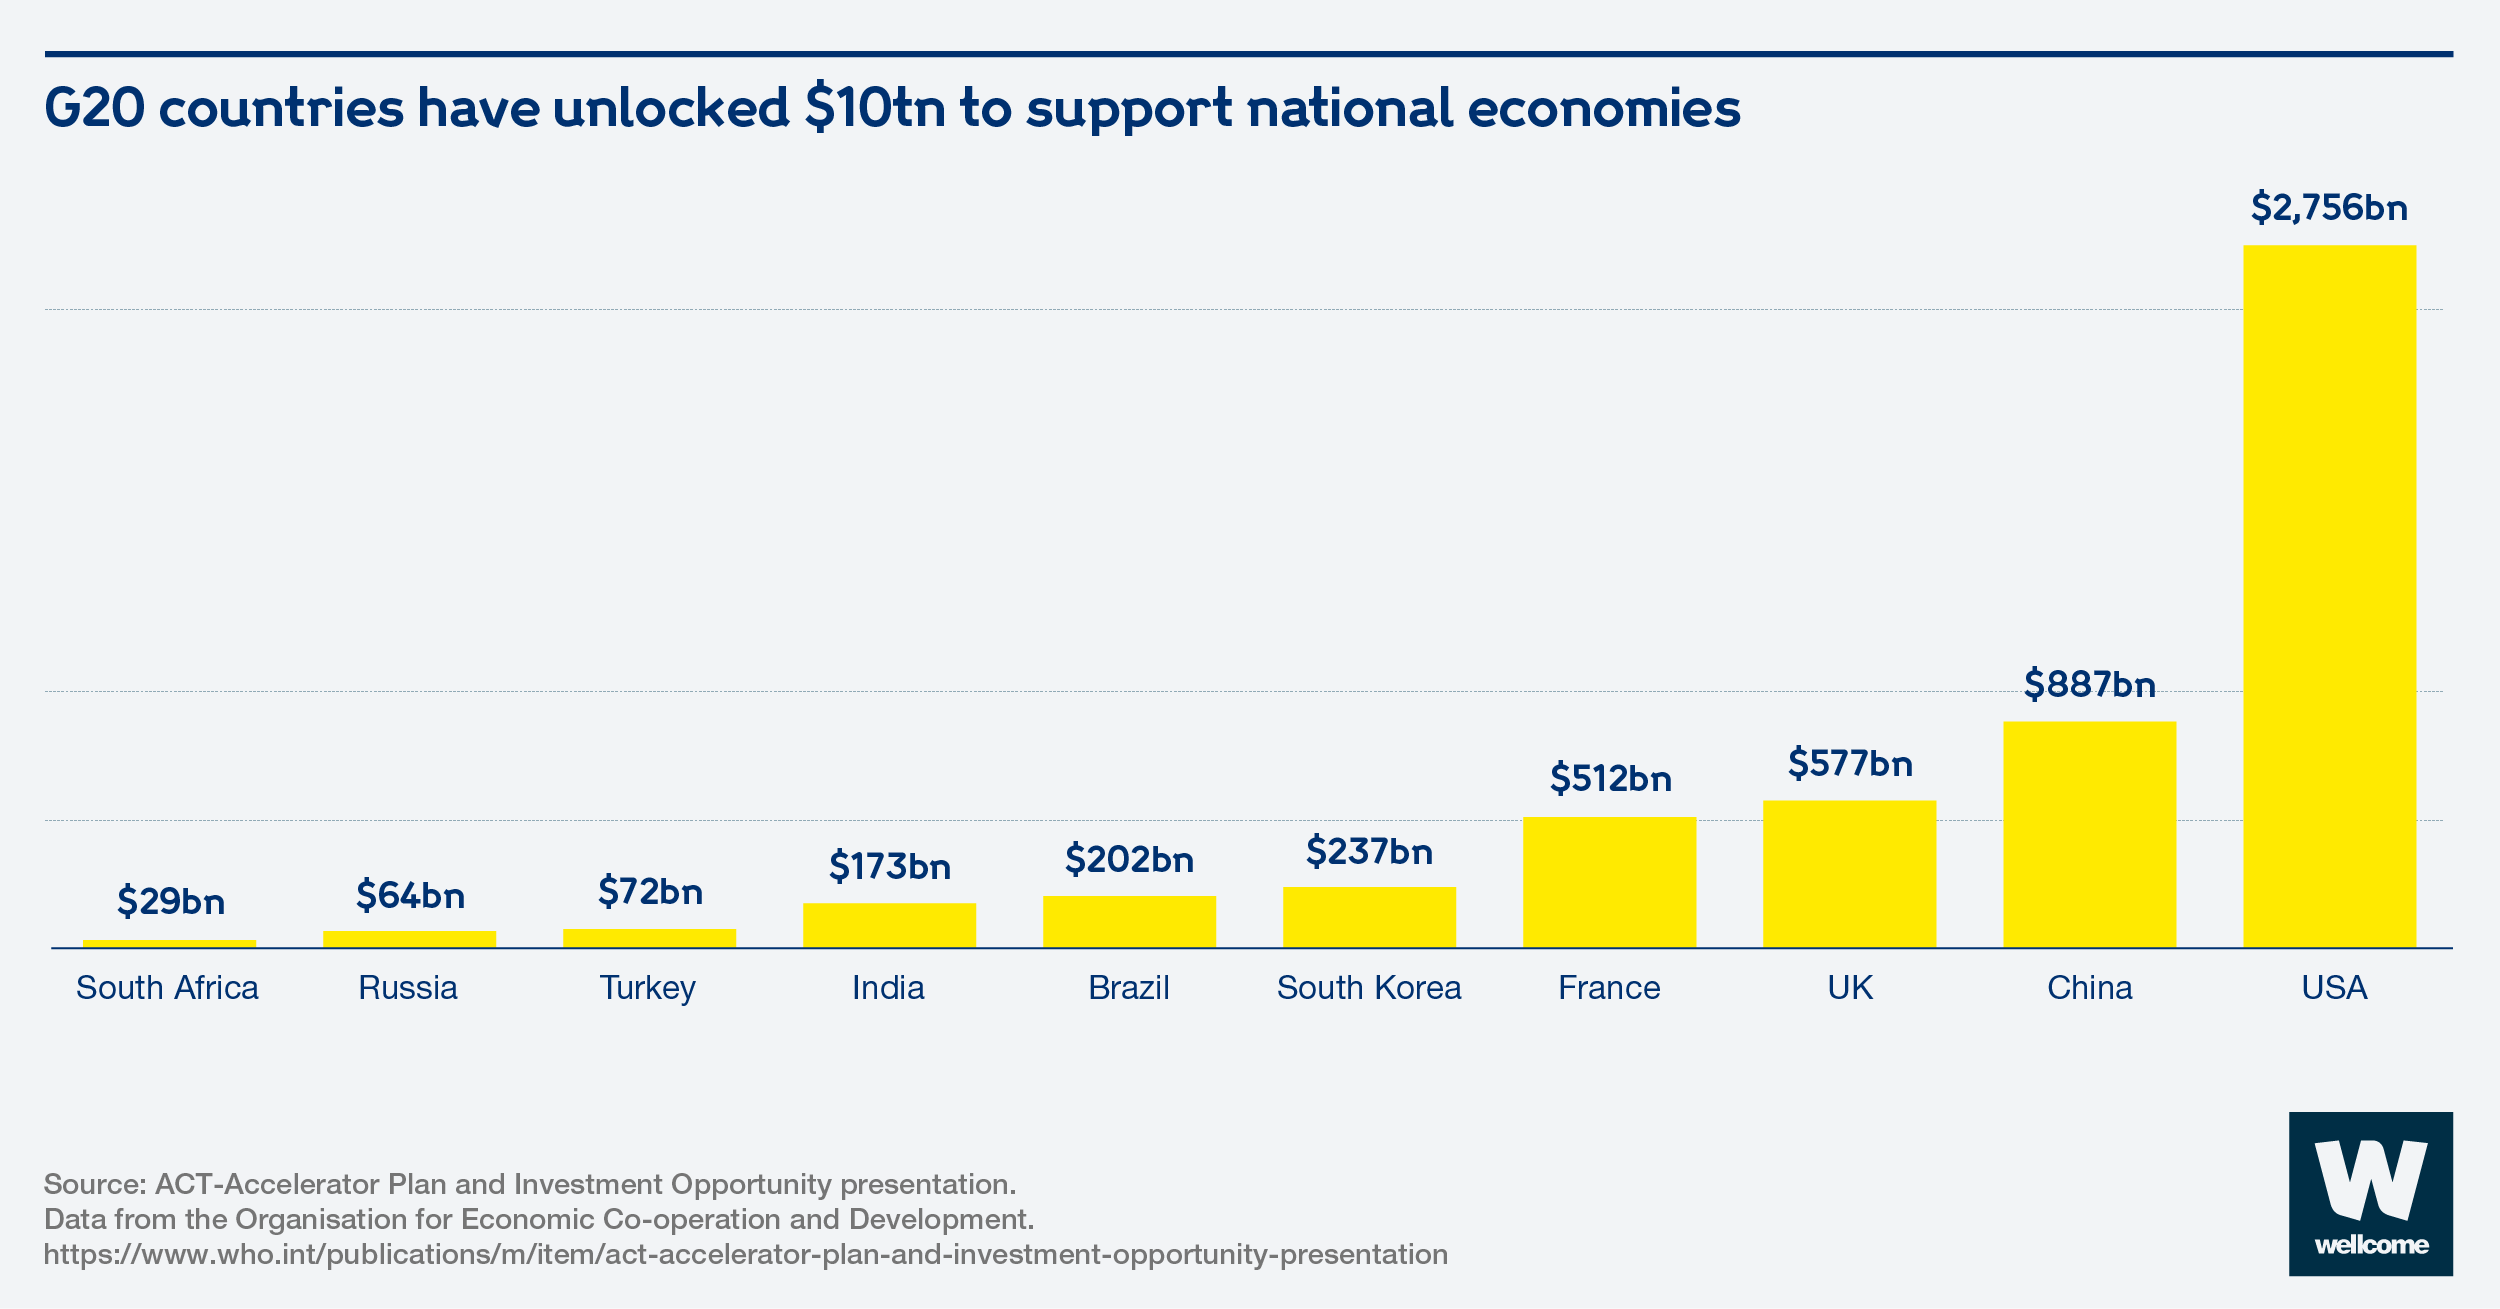 Graphic showing the size of the stimulus packages unlocked by ten G20 countries.